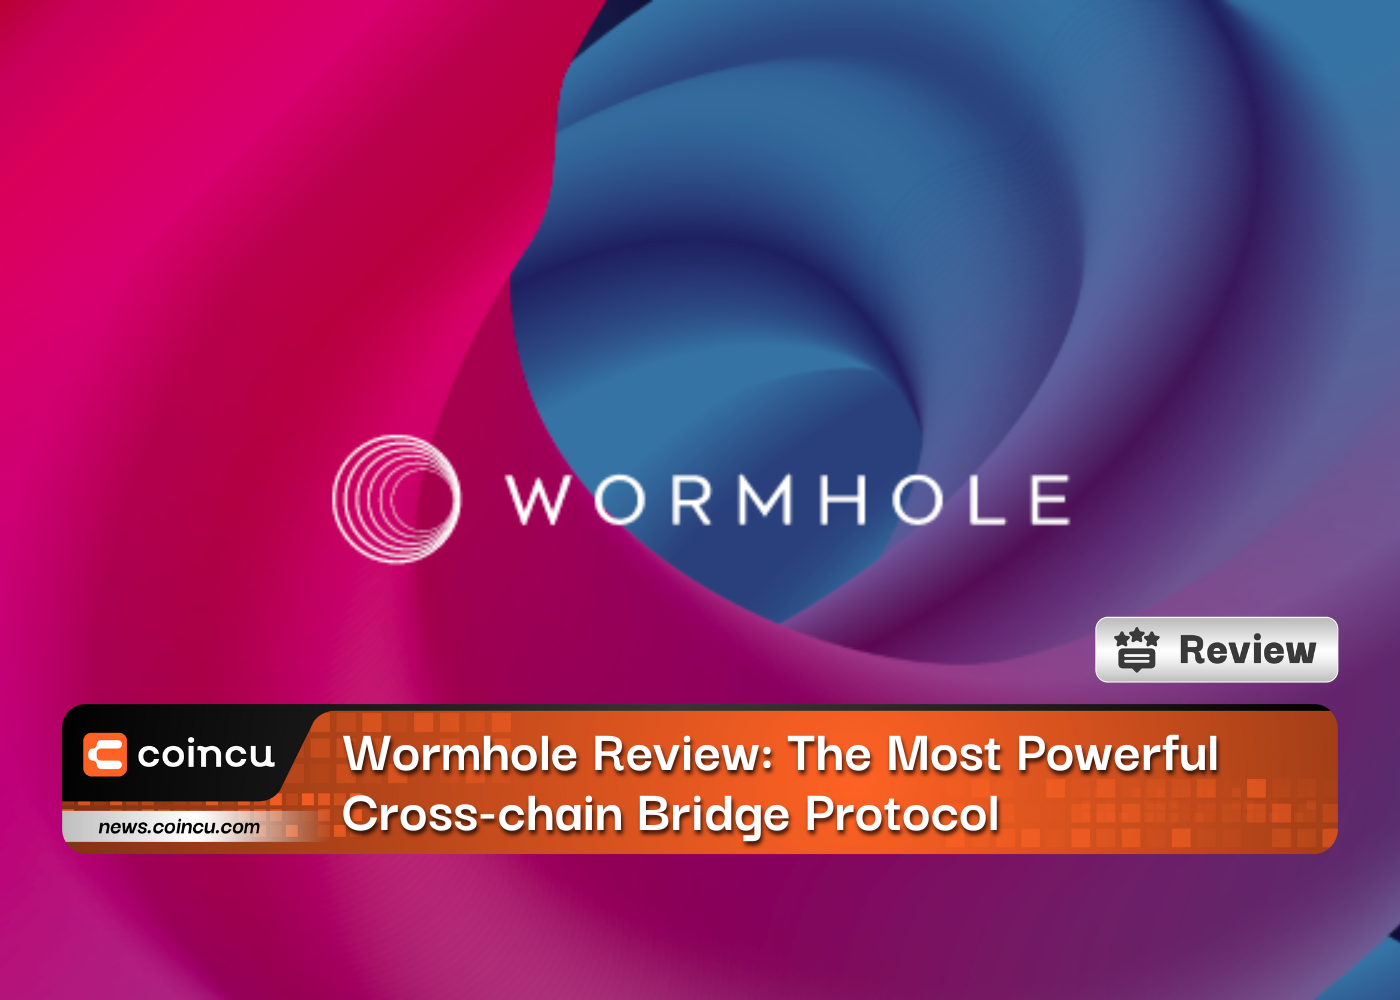 Wormhole Review: The Most Powerful Cross-chain Bridge Protocol